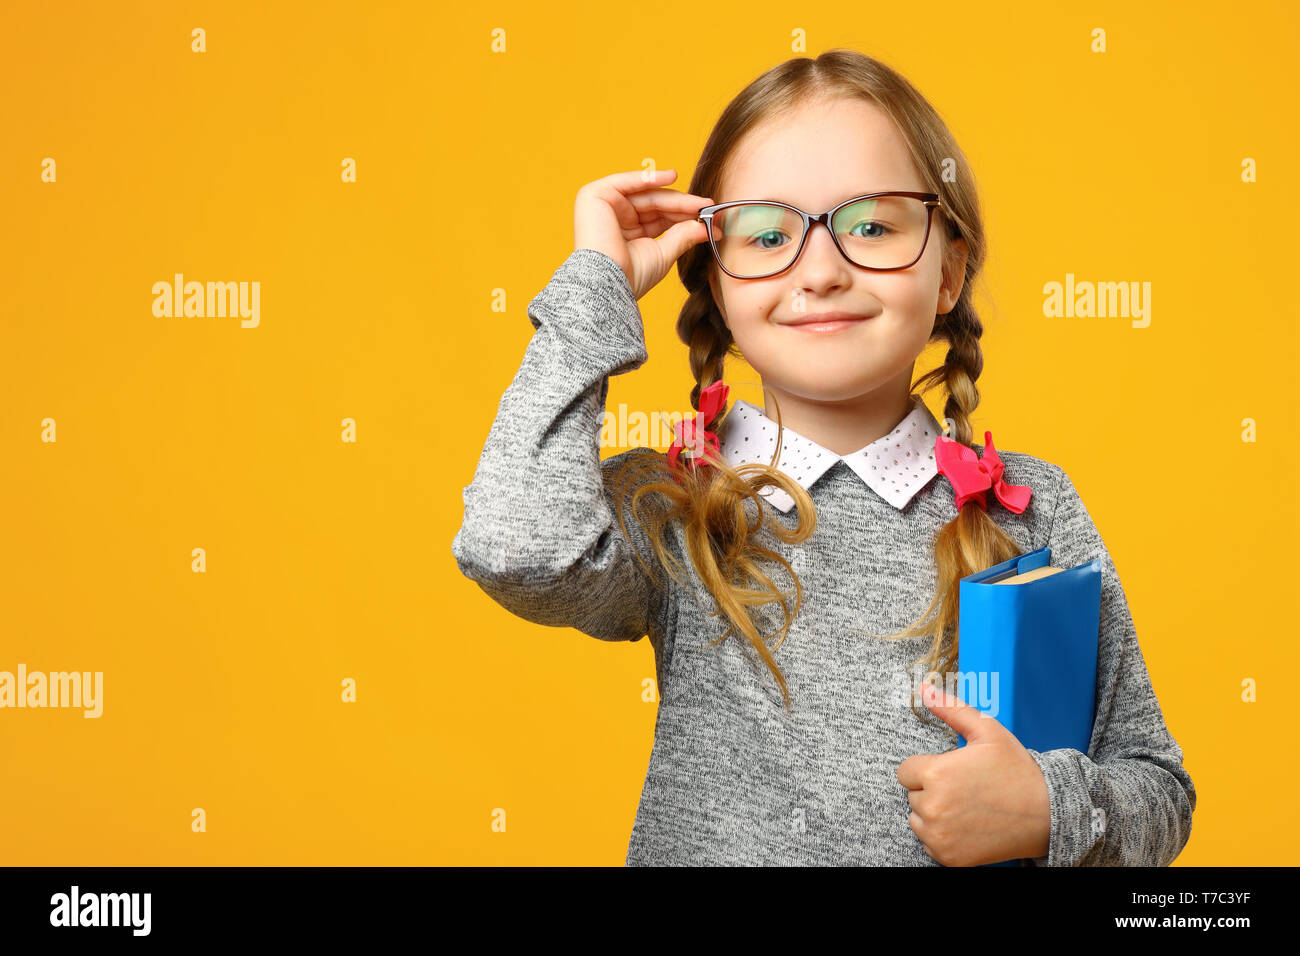 Portrait of a cute little kid girl on a yellow background. Child schoolgirl looking at the camera, holding a book and straightens glasses. The concept Stock Photo